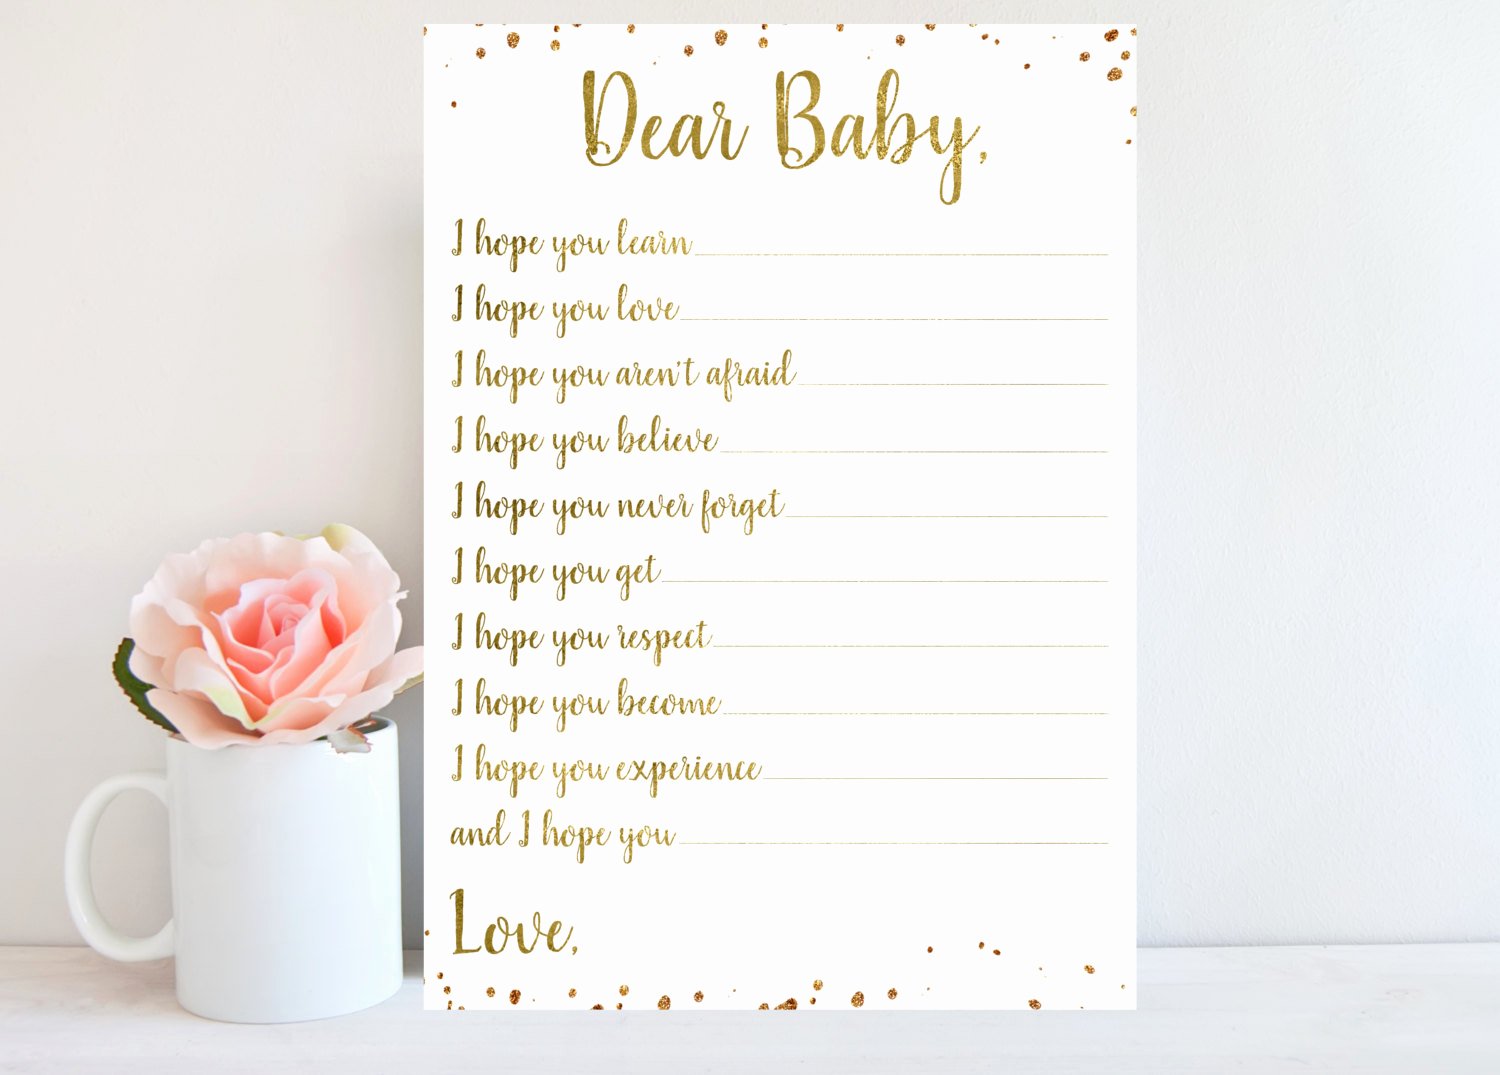 Baby Shower Card to Print Inspirational Dear Baby Baby Shower Game Girl Boy Wishes for Baby